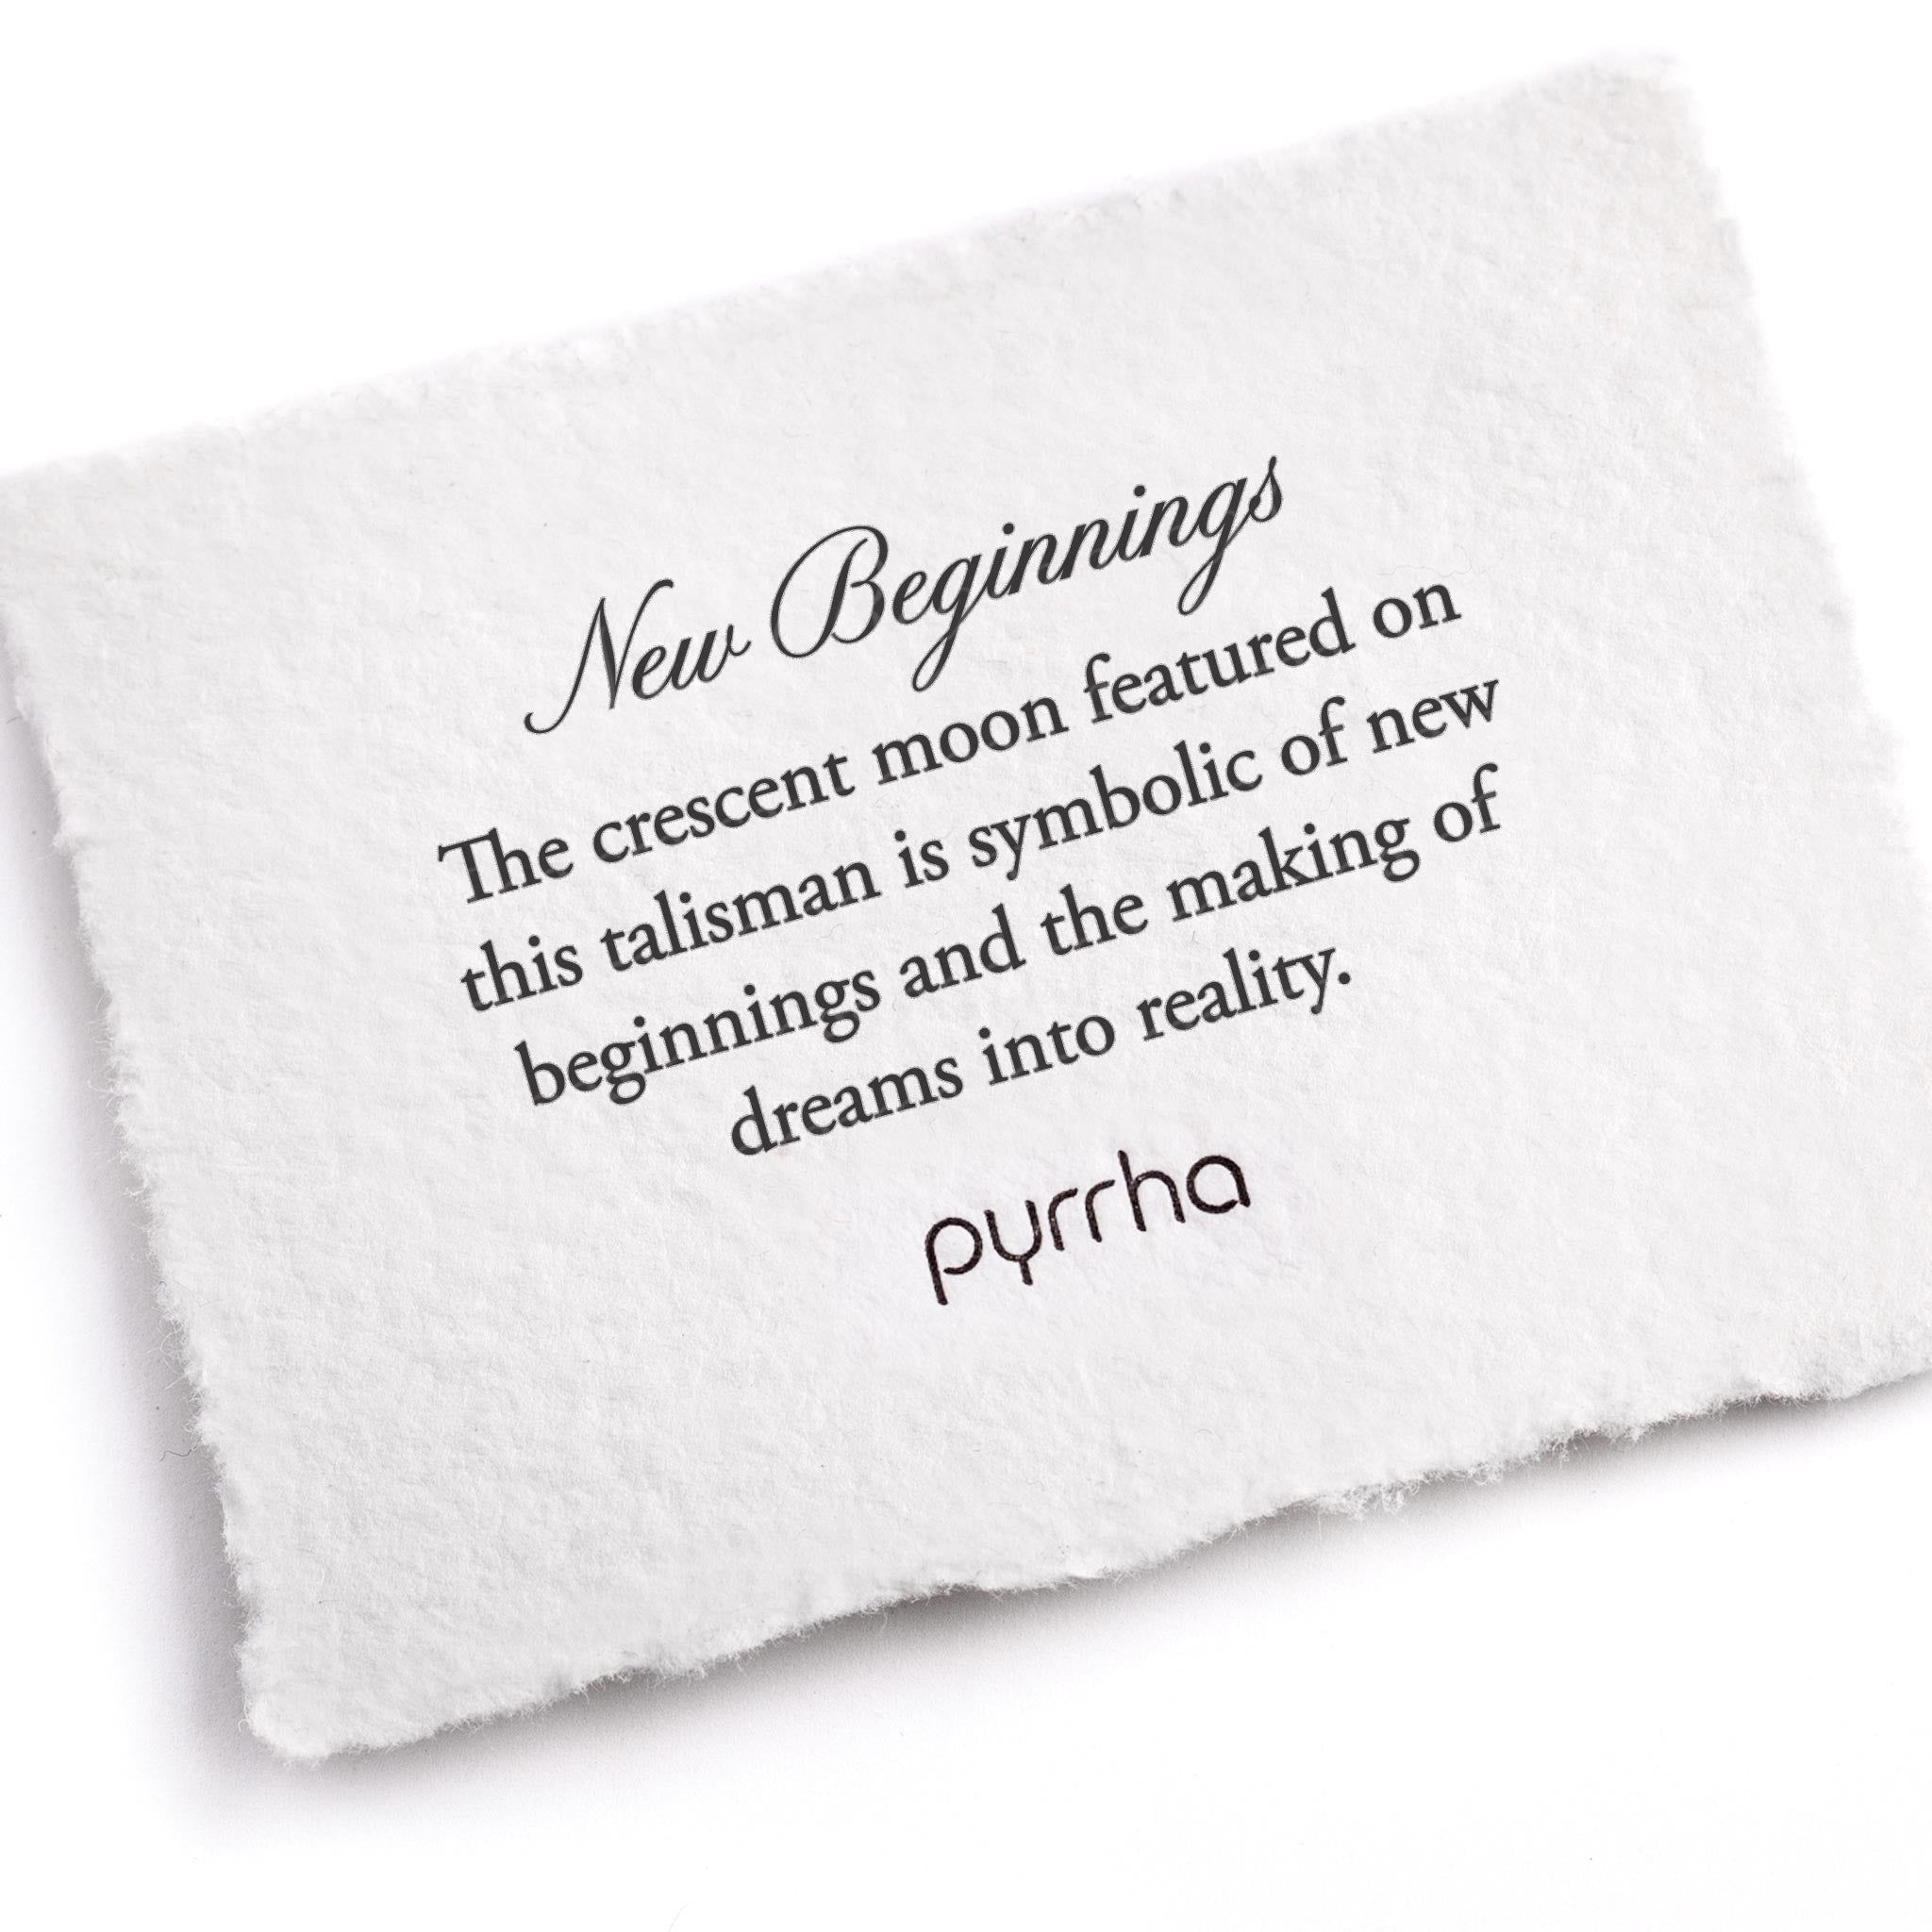 A hand-torn, letterpress printed card describing the meaning for Pyrrha's New Beginnings Talisman Necklace